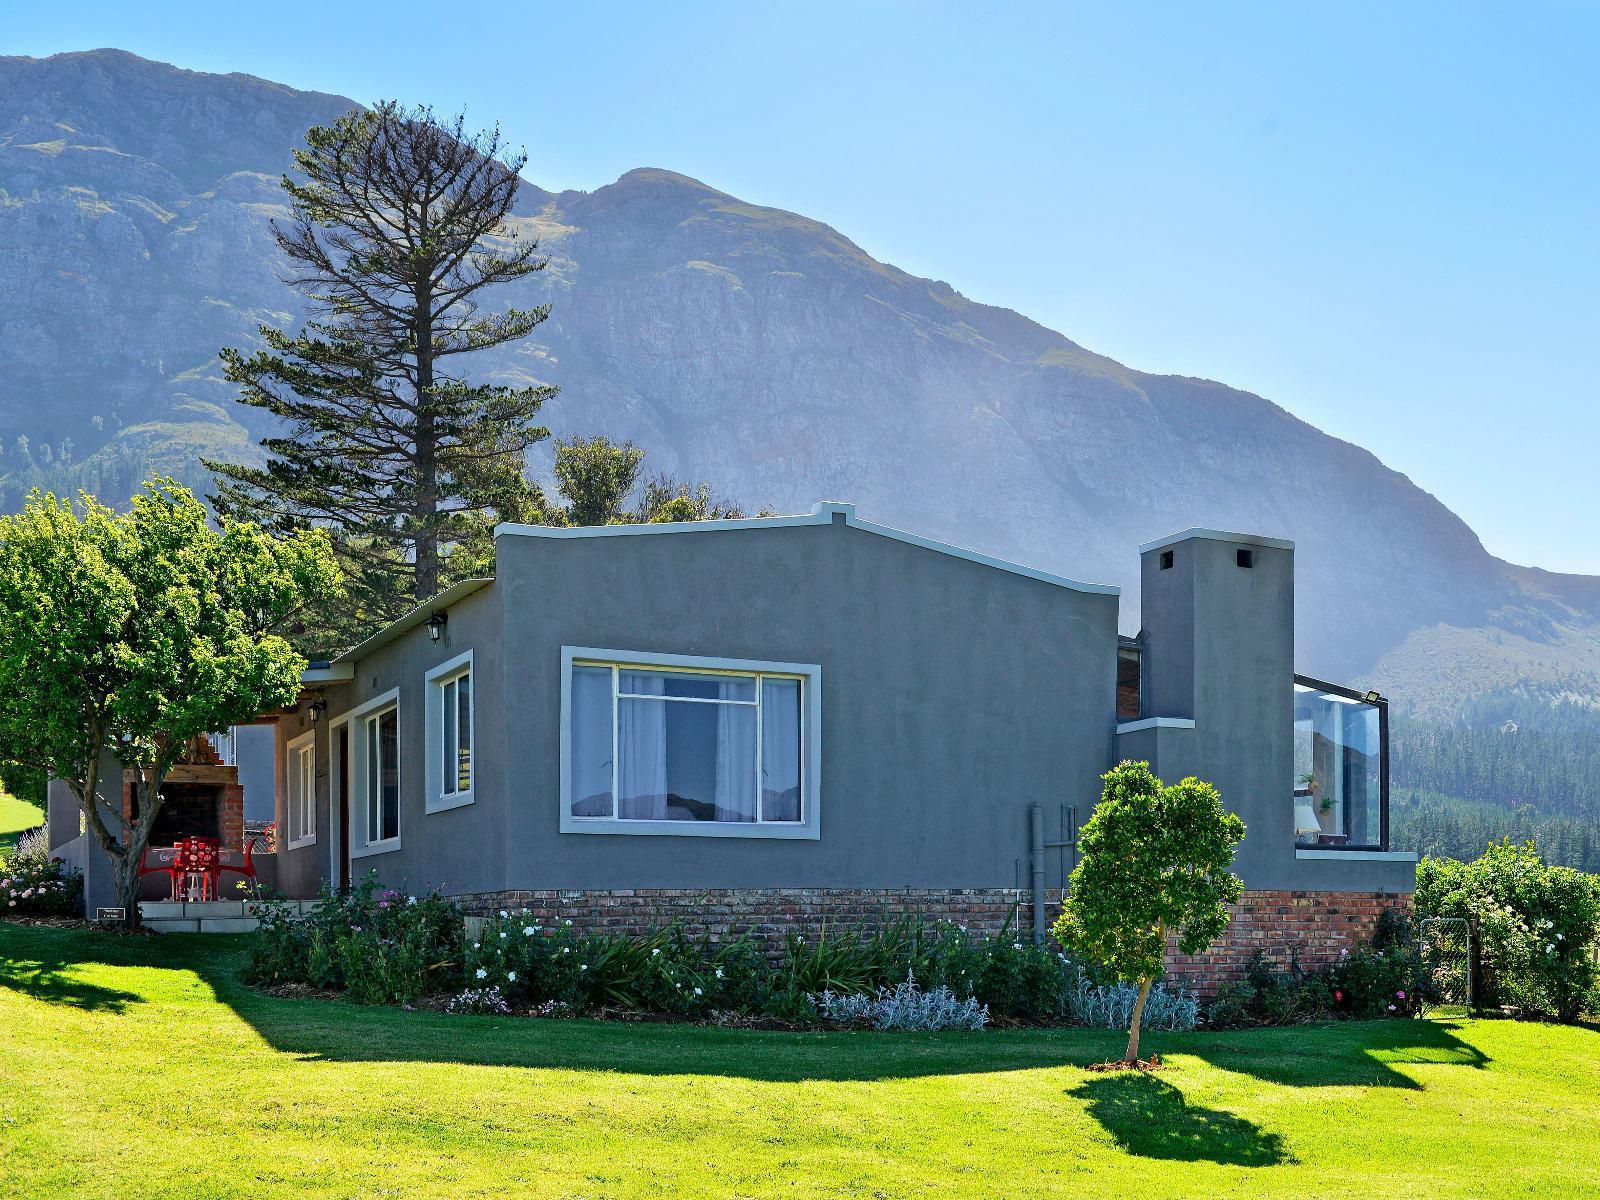 Courchevel Cottages Franschhoek Western Cape South Africa House, Building, Architecture, Mountain, Nature